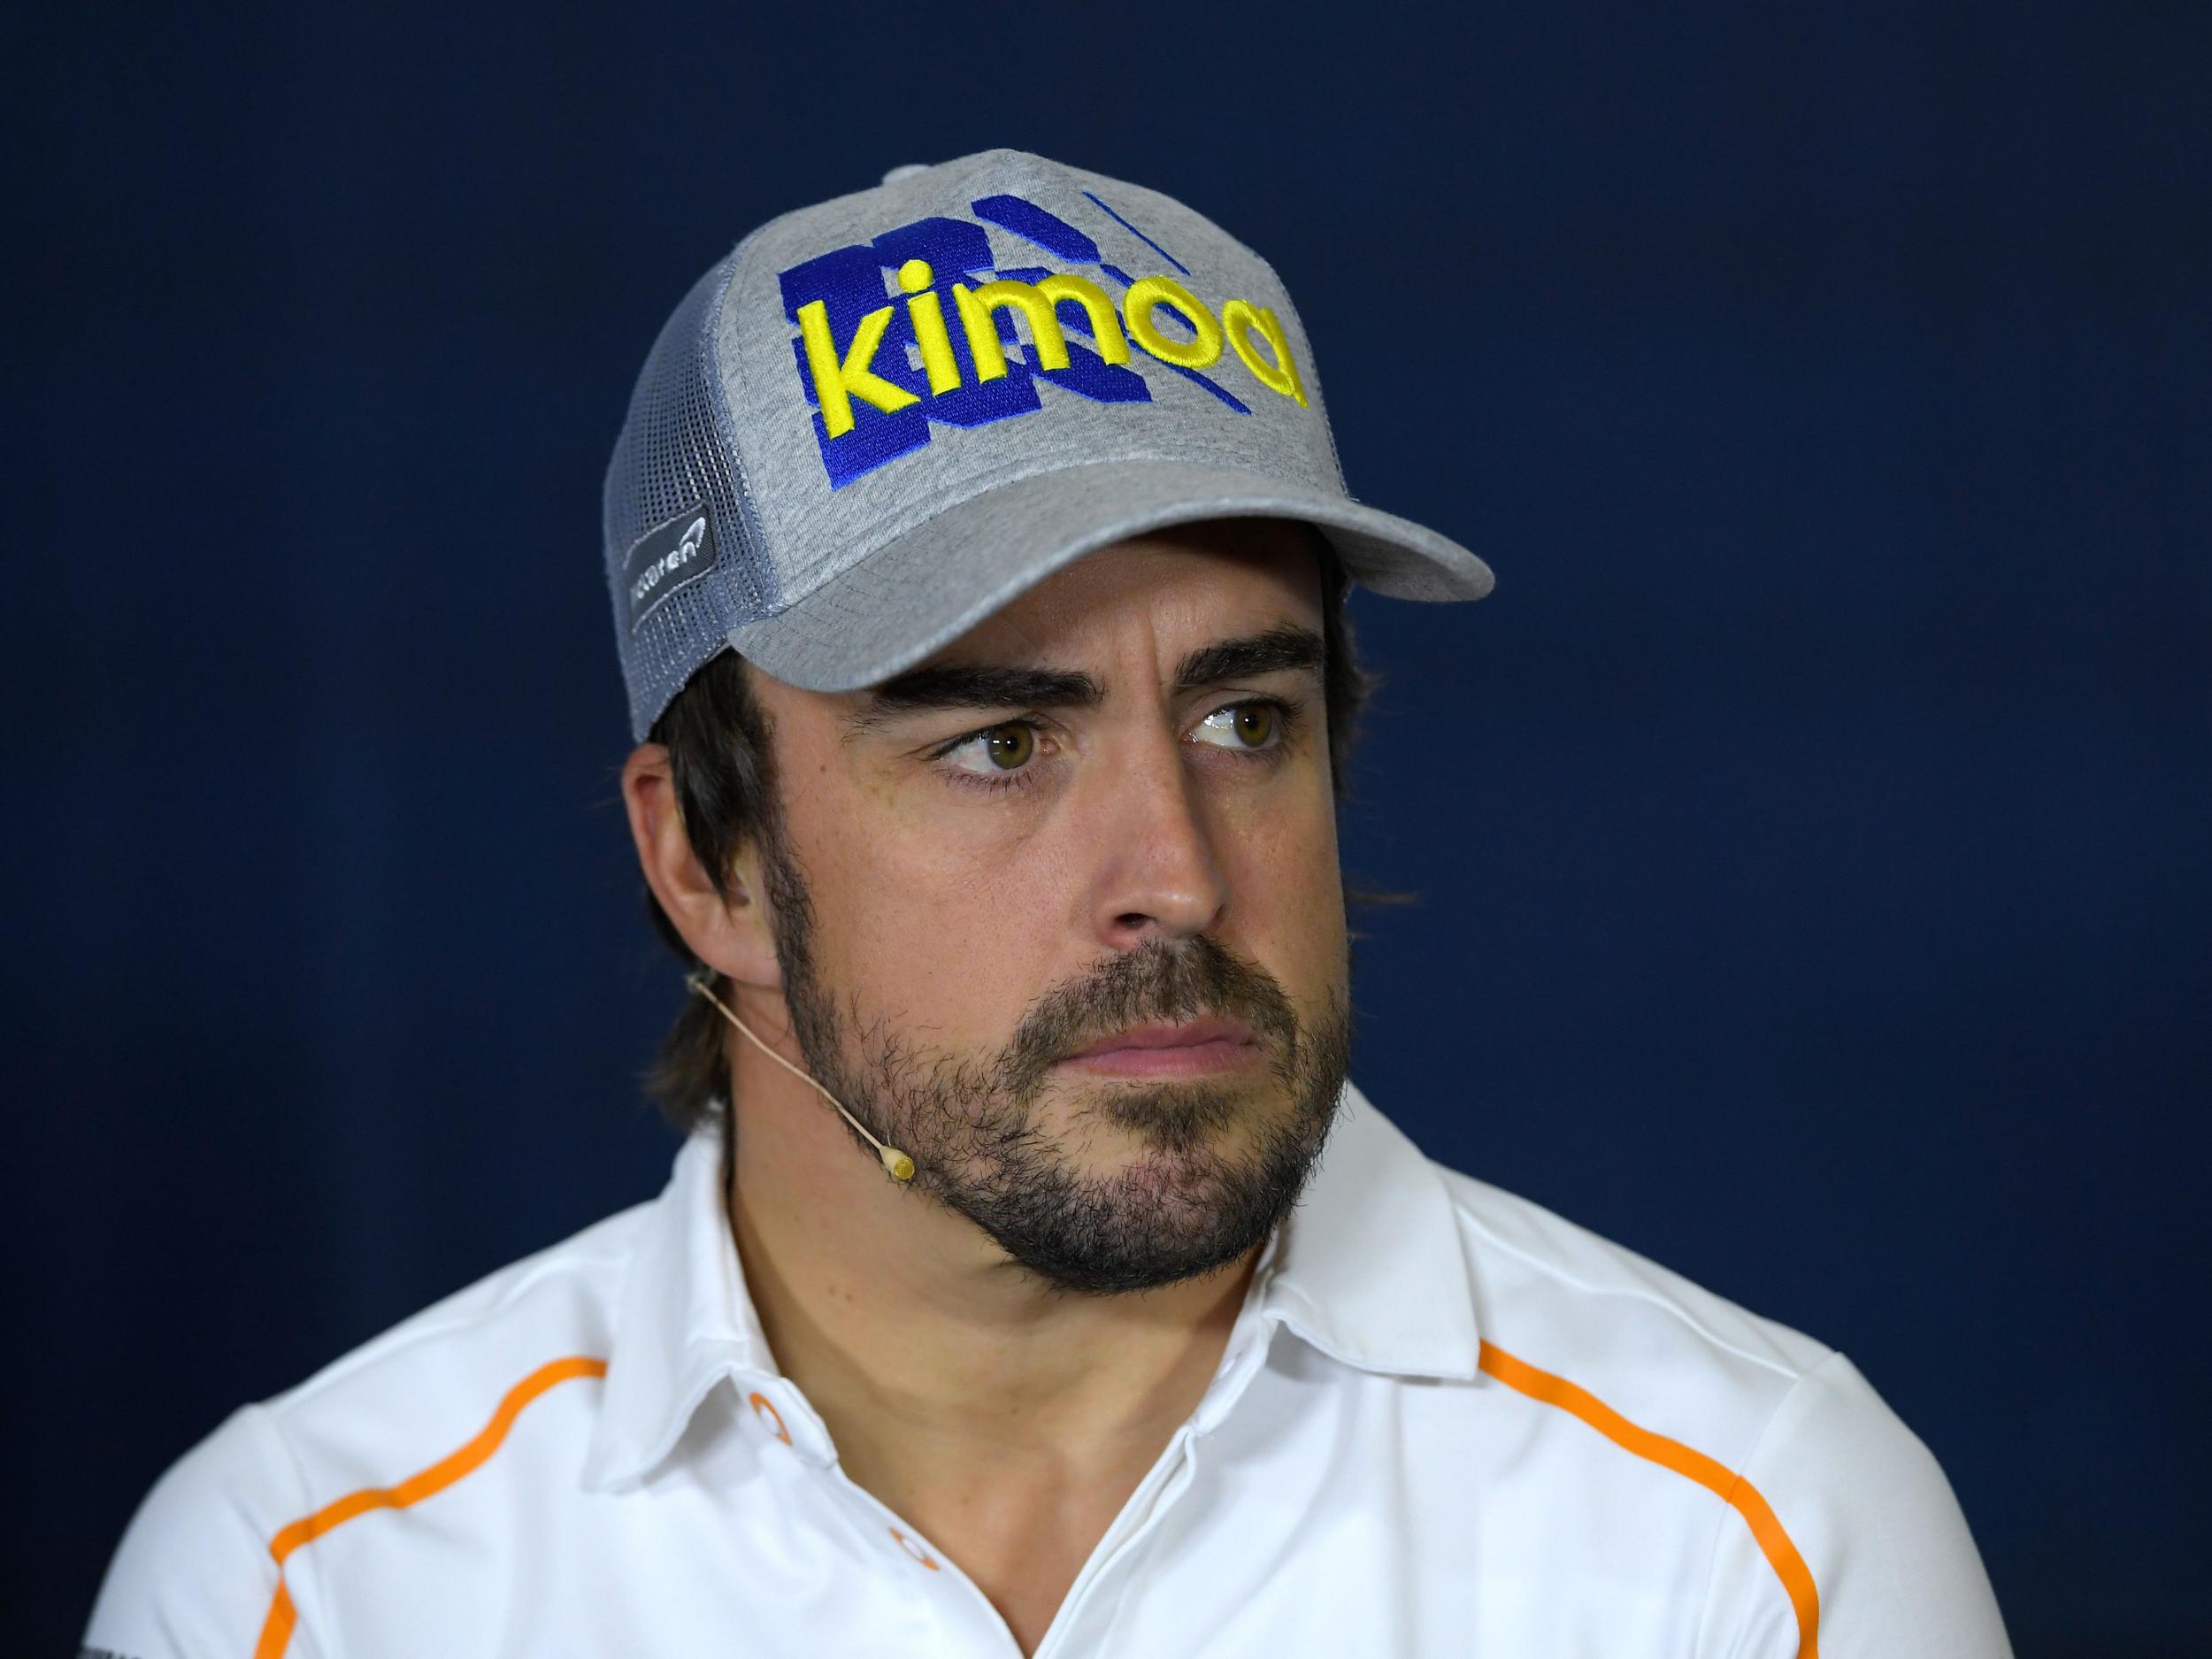 Alonso is hoping to replicate his good form in Spain